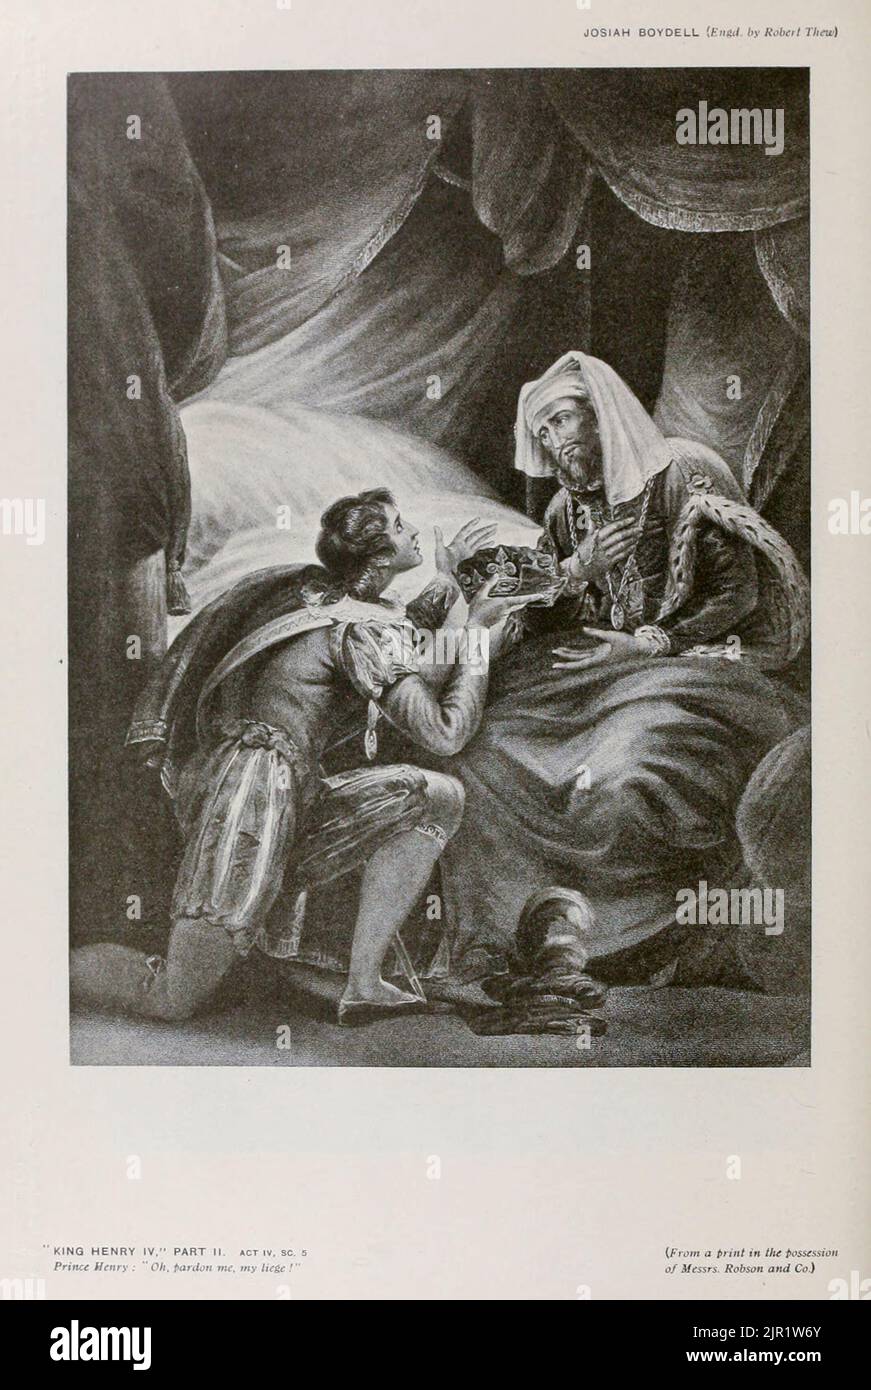 KING HENRY IV PART II ACT iv, sc 5 Prince Henry : ' Oh. Pardon me: my liege by JOSIAH BOYDELL (Engraved hy Robert Thew) from the book '  Shakespeare in pictorial art ' by Salaman, Malcolm Charles, 1855-1940; Holme, Charles, 1848-1923 Publication date 1916 Publisher London, New York [etc.] : 'The Studio' ltd. Stock Photo